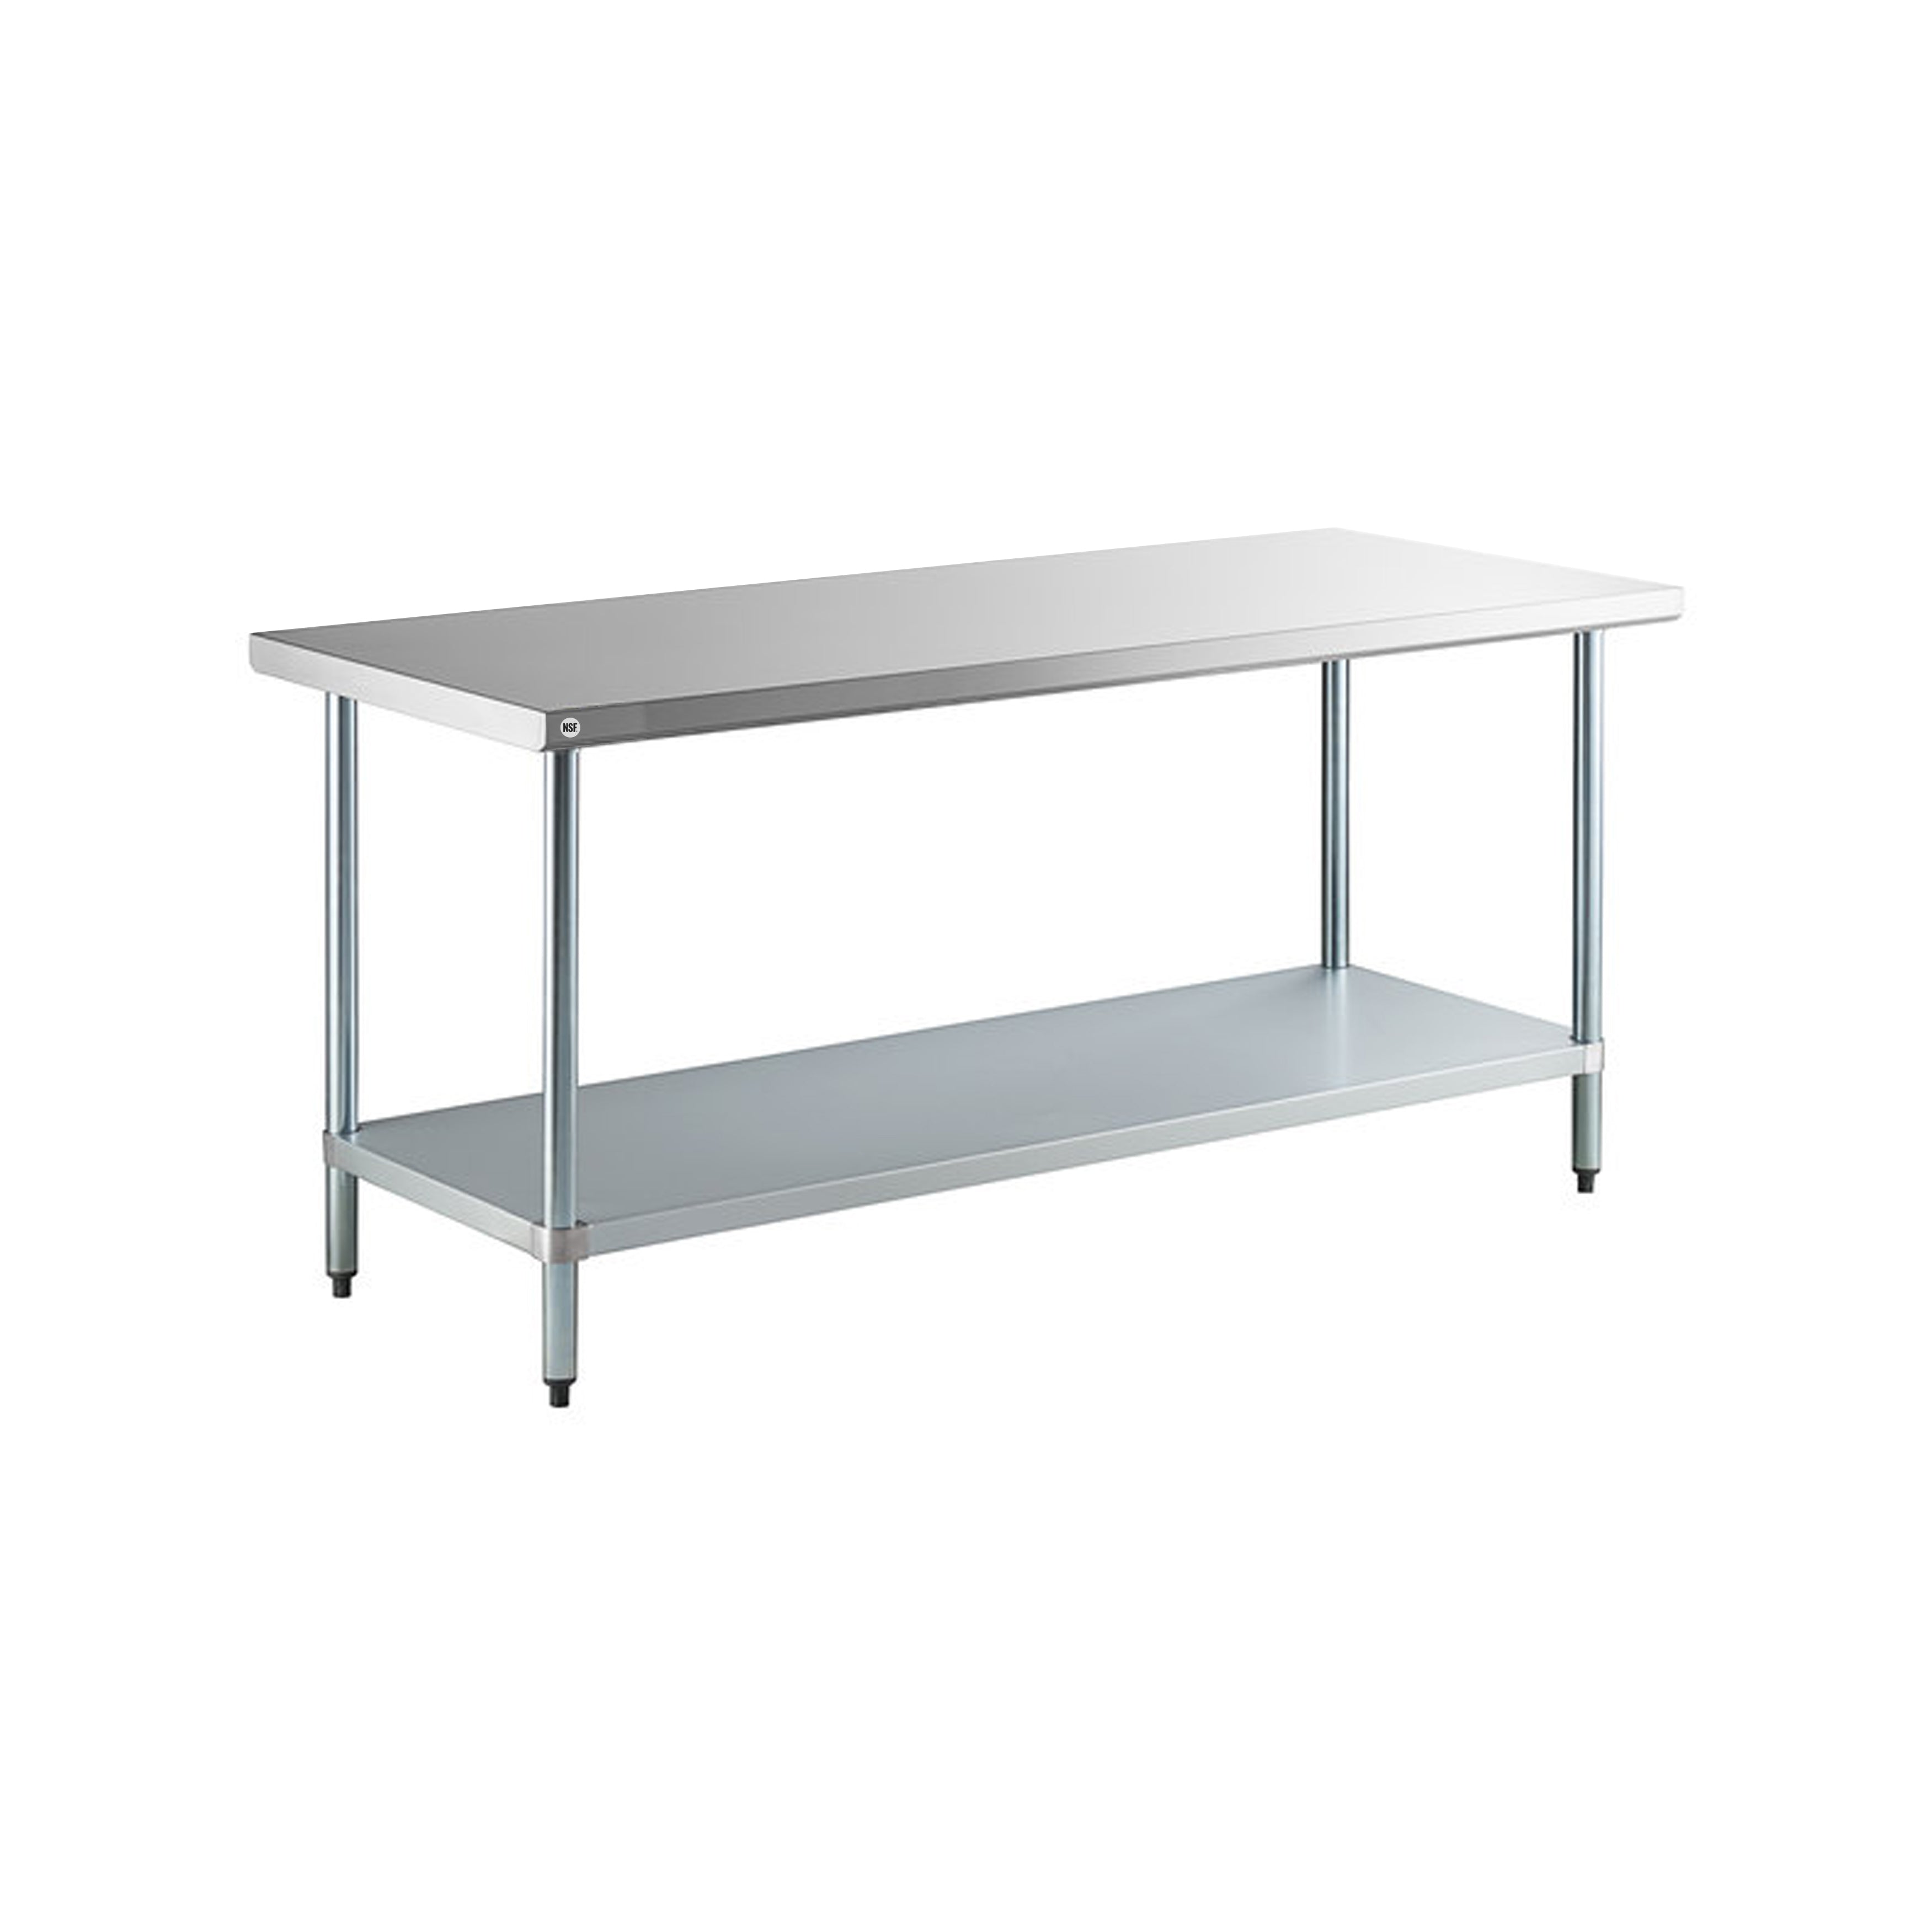 Omcan - 24196, Commercial 18" x 24" Stainless Steel Kitchen Work Table 390lbs Light Duty